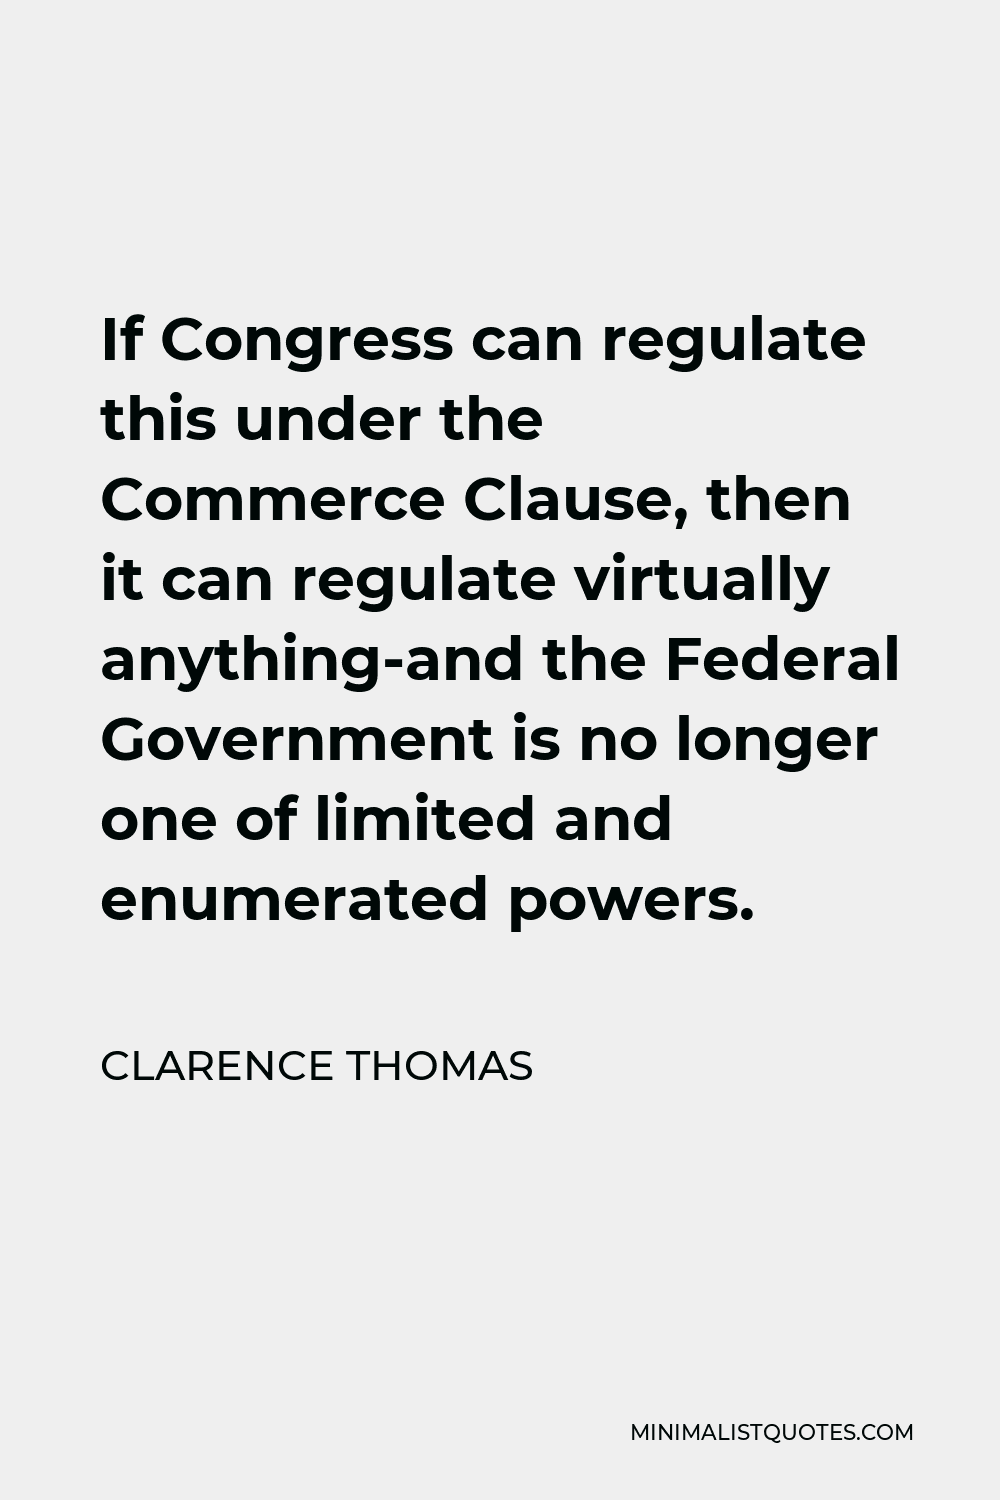 Clarence Thomas Quote - If Congress can regulate this under the Commerce Clause, then it can regulate virtually anything-and the Federal Government is no longer one of limited and enumerated powers.